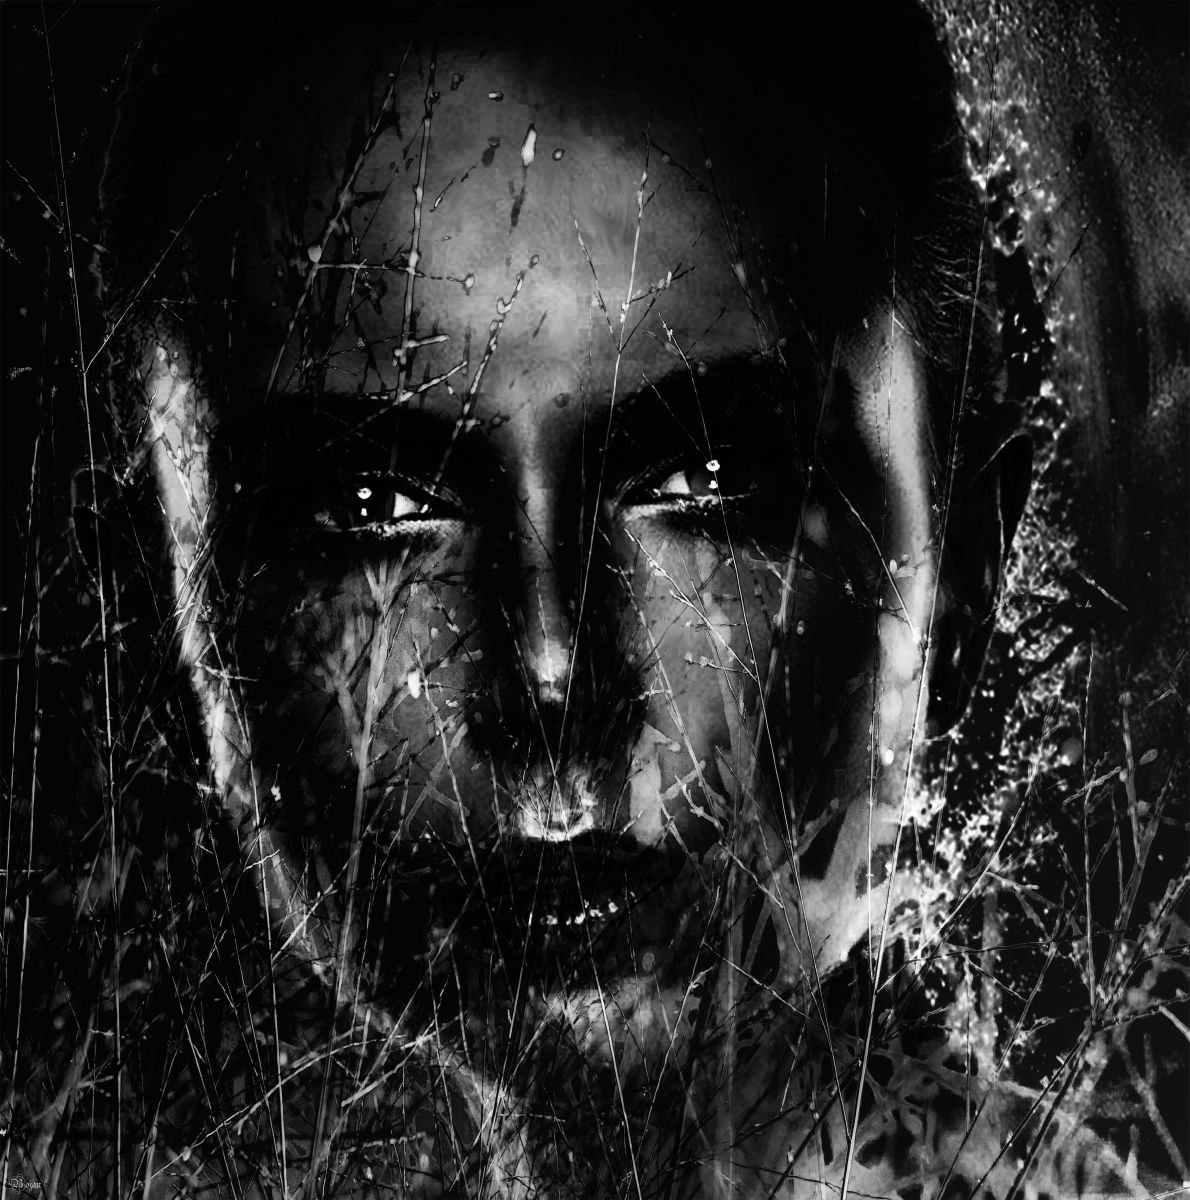 Looking Through Darkness by Bojan Jevtic